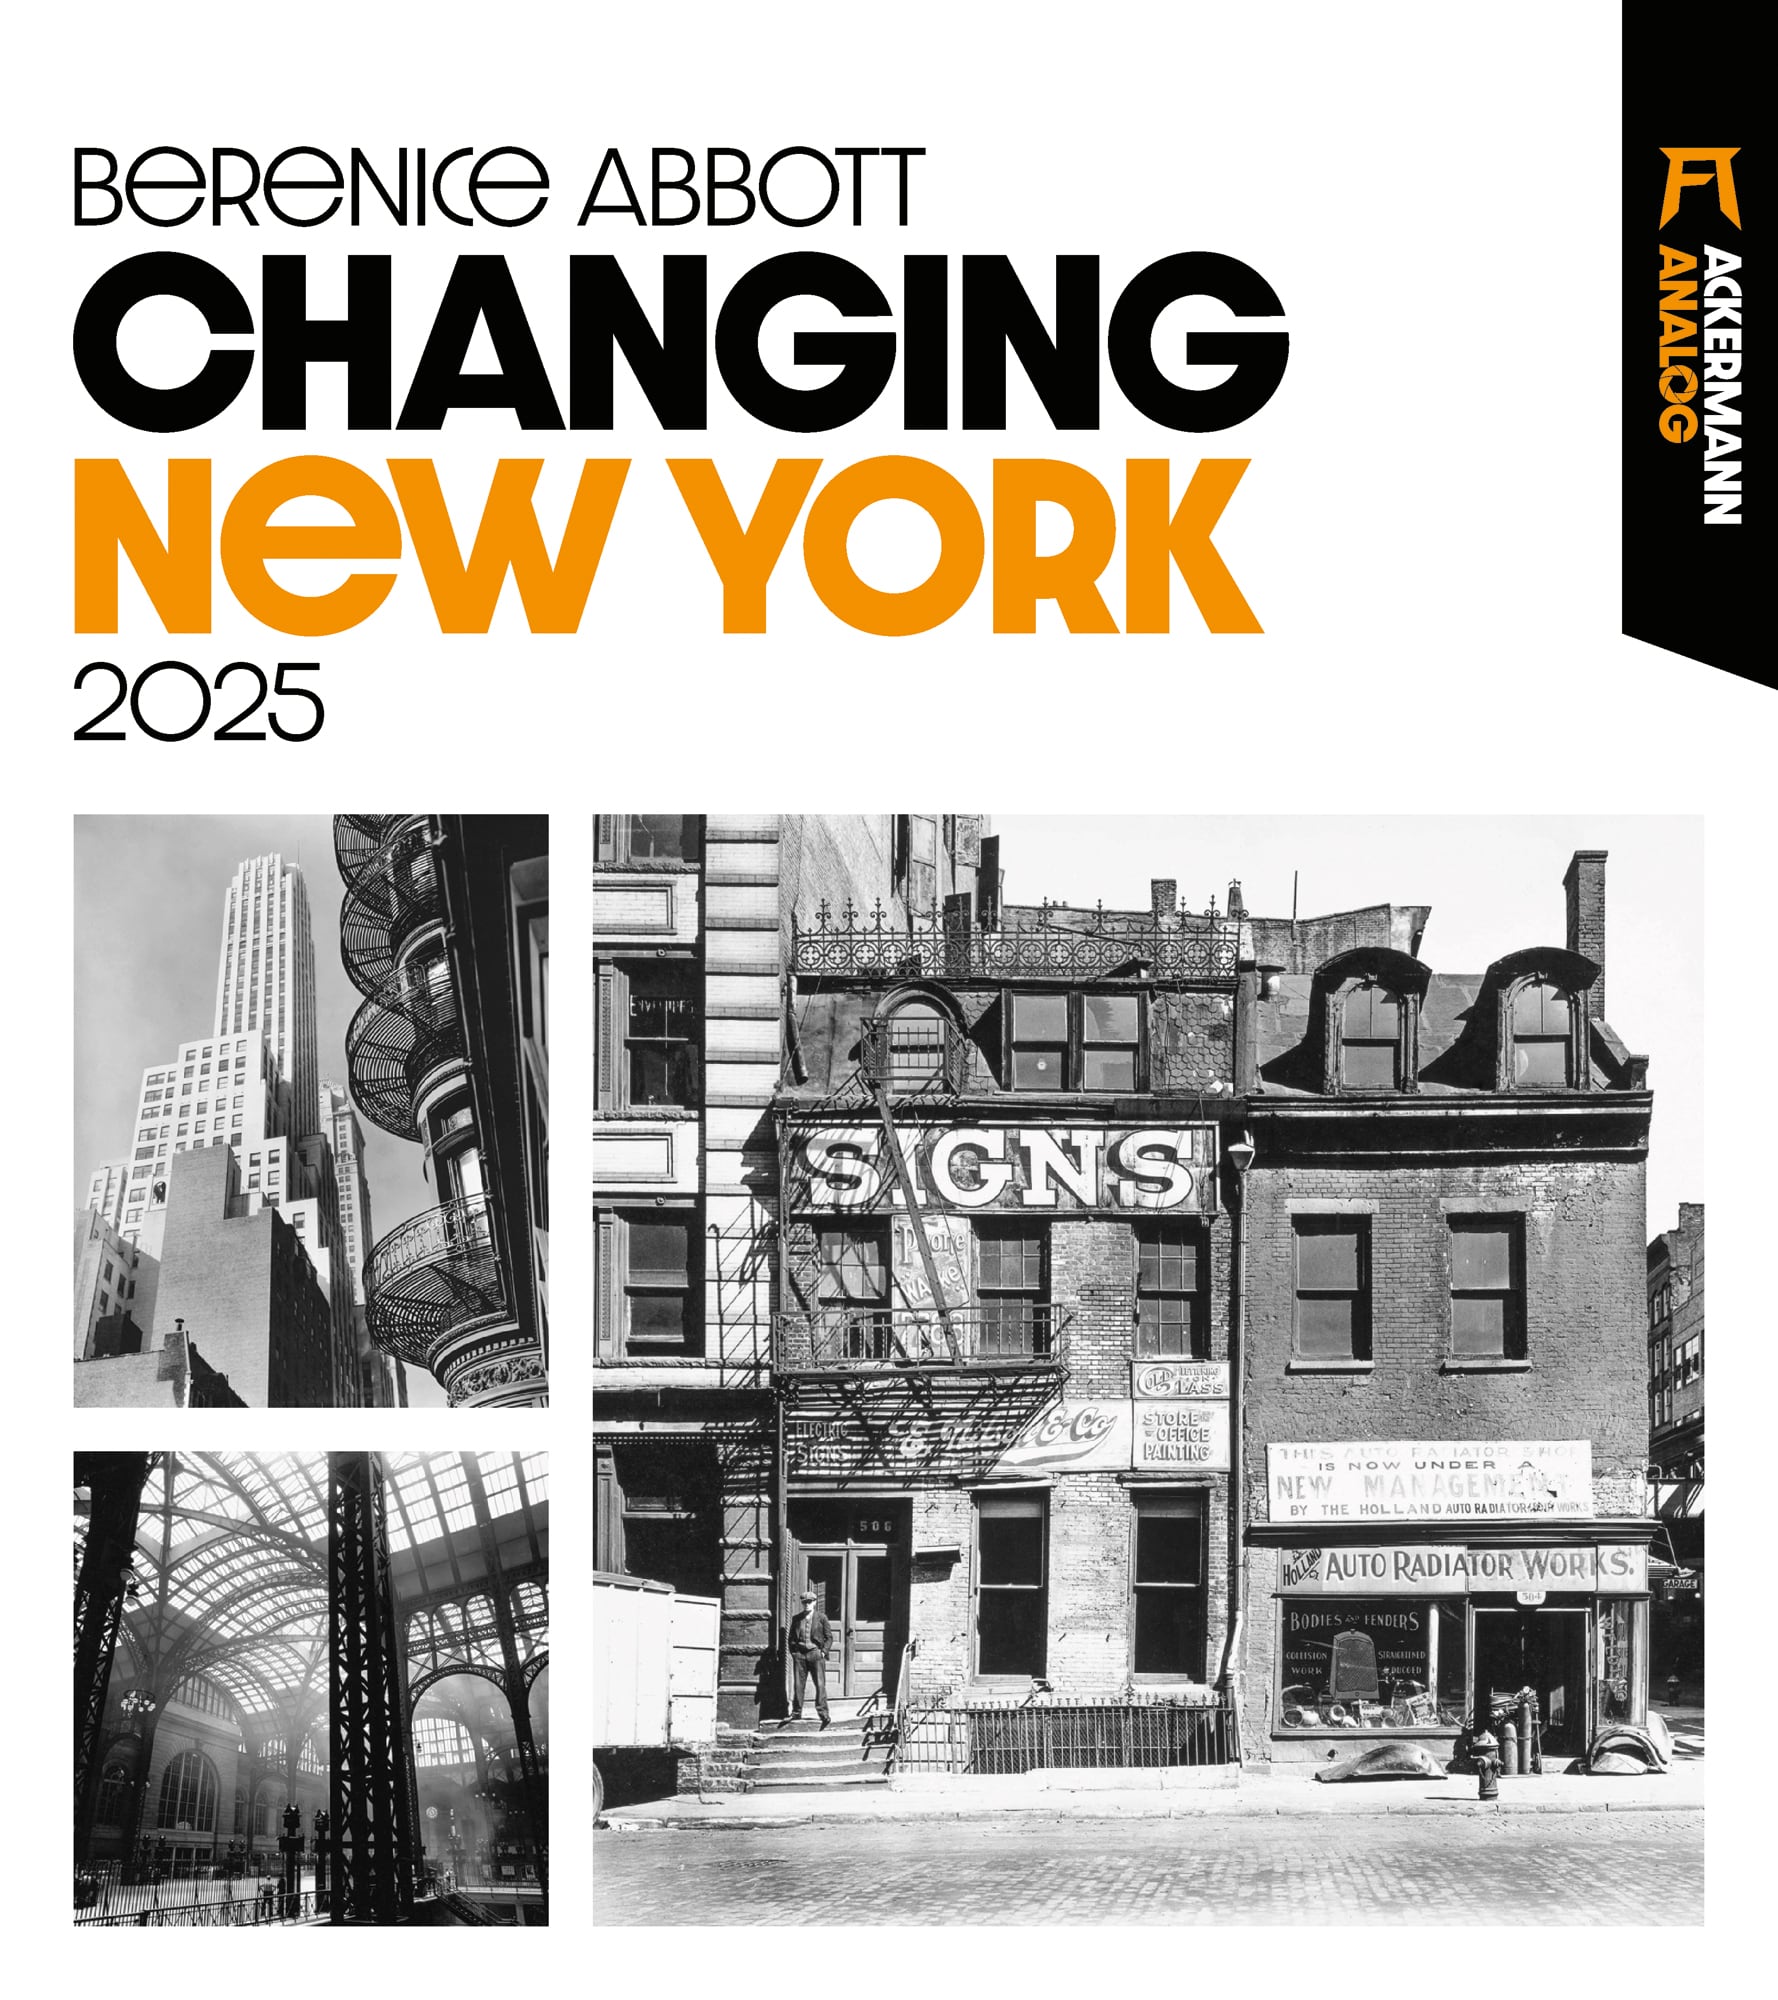 Ackermann Calendar Changing New York 2025 - Cover Page